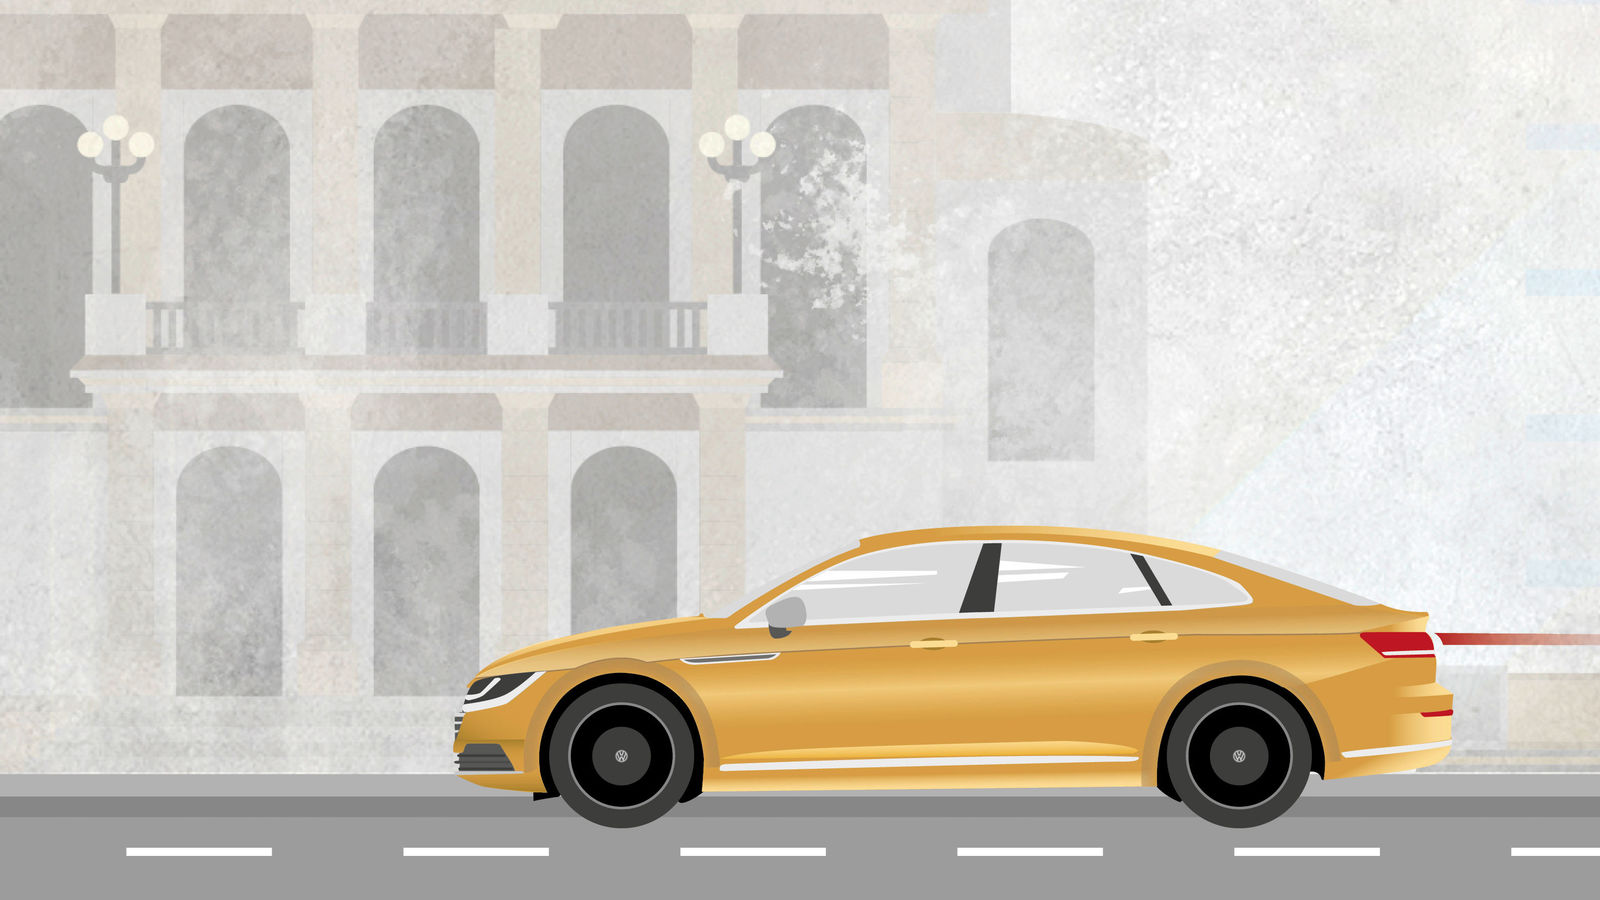 Story: The Arteon at a glance